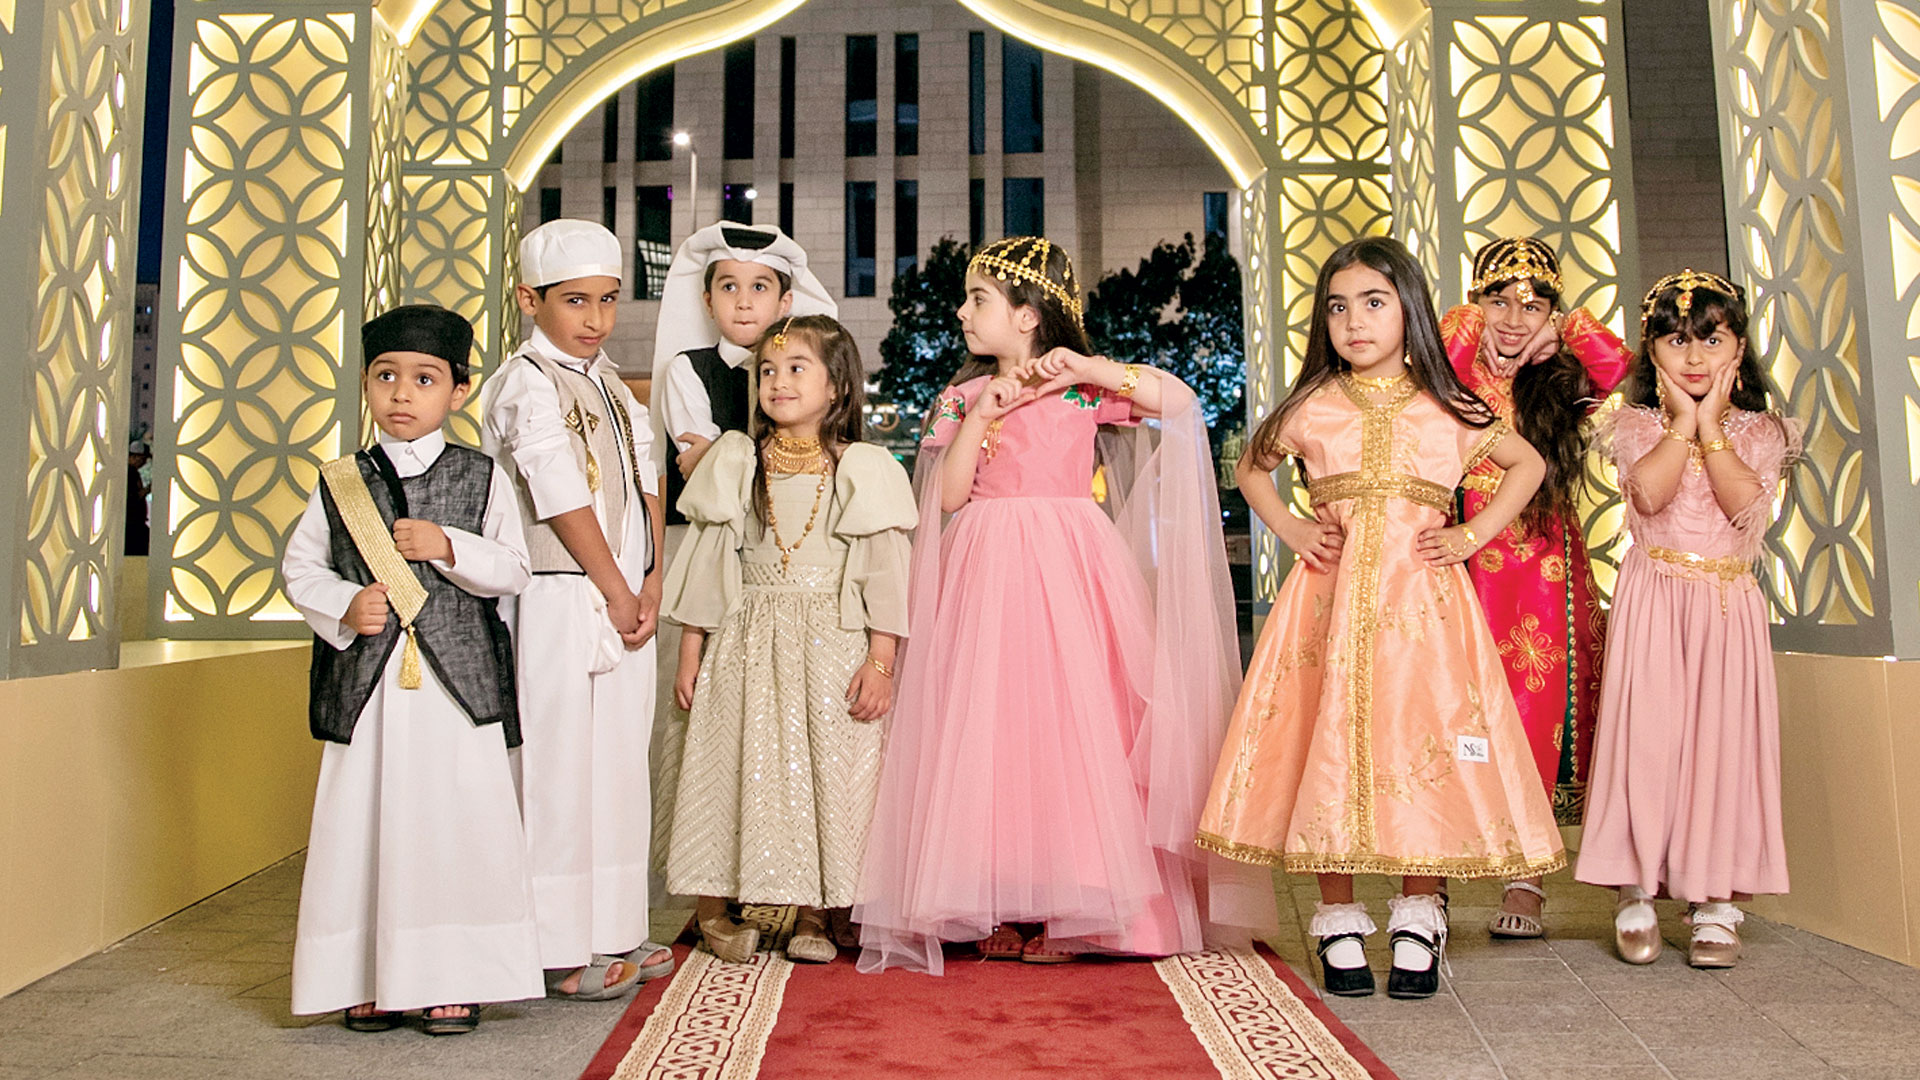 Msheireb Downtown Doha Welcomes Children, Families to Experience Unique Garangao Celebrations